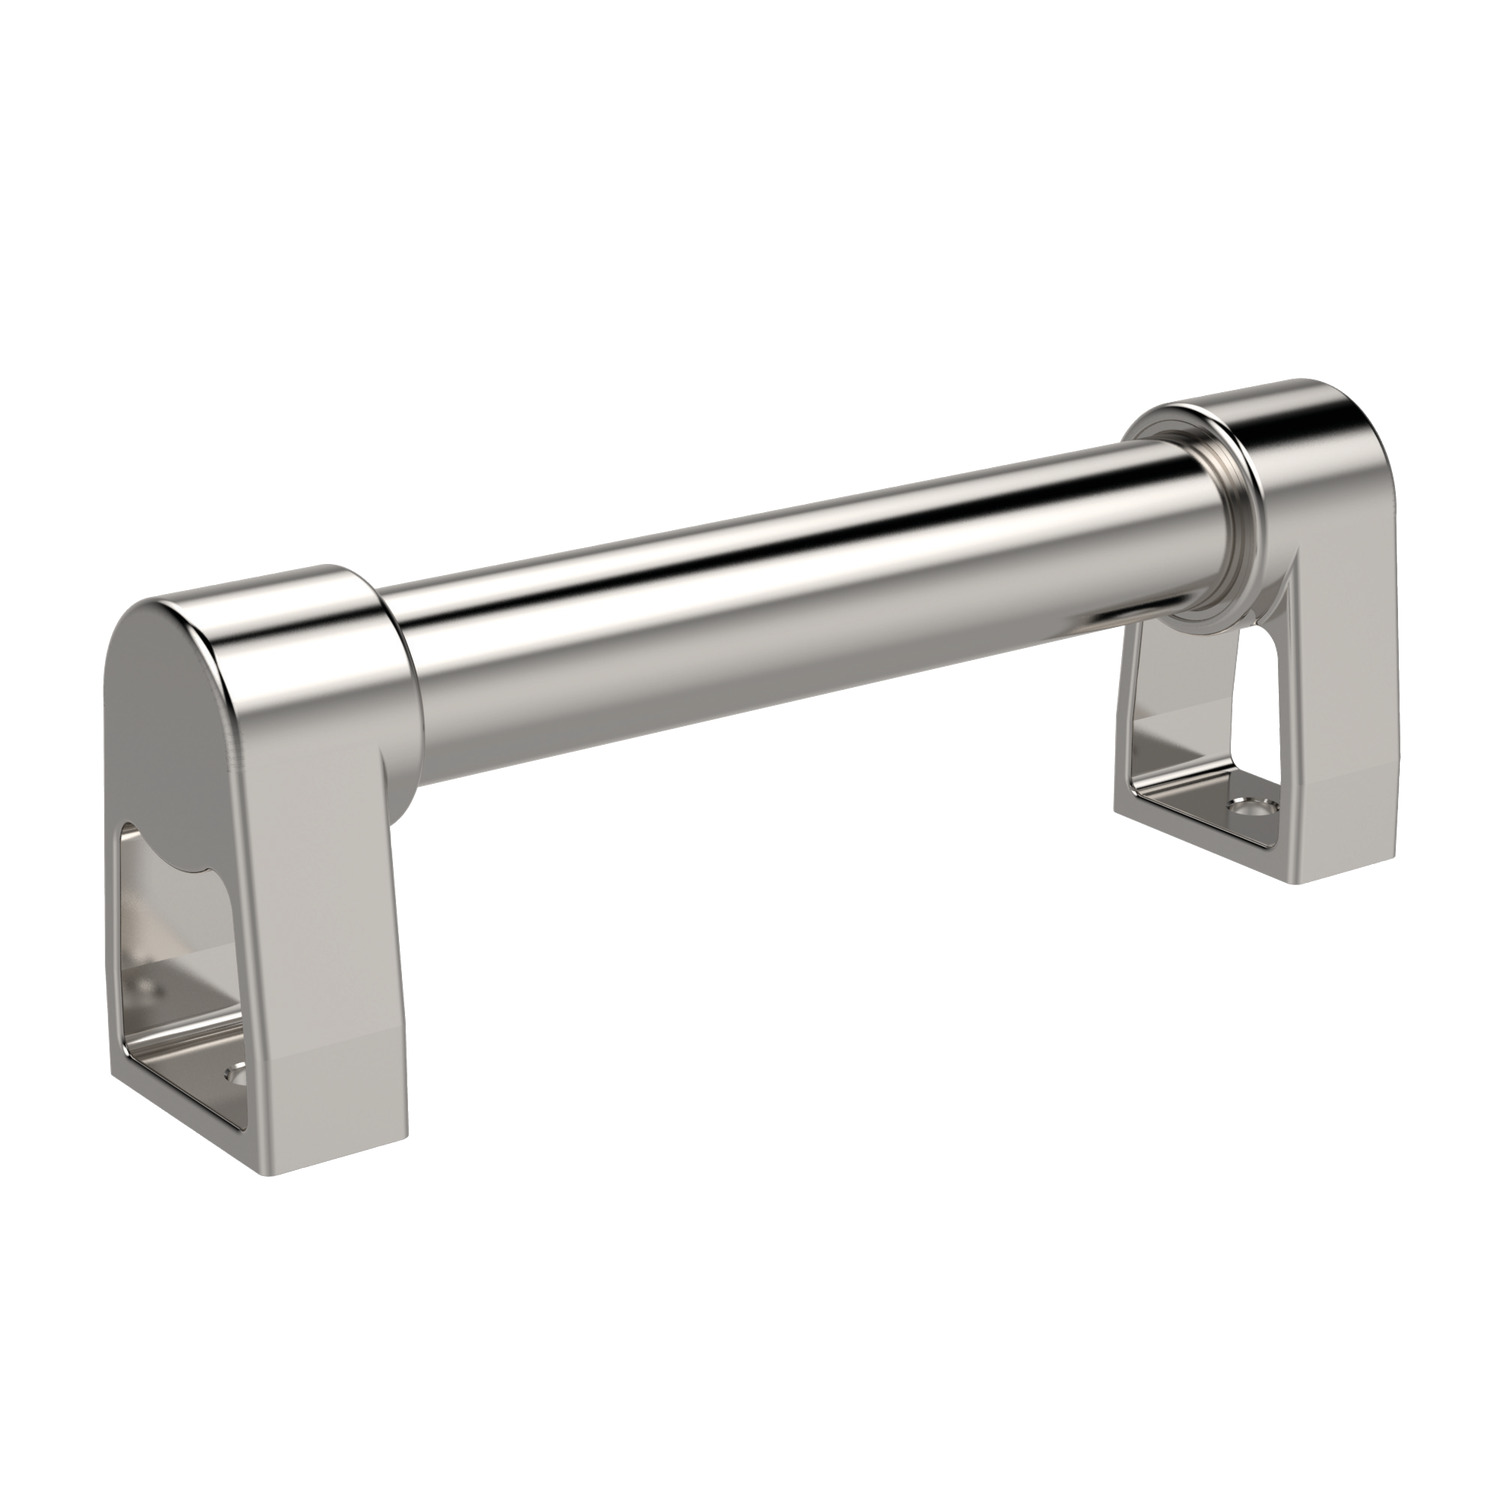 Pull Handles Long term temperature resistance -60°C to + 200°C and an easy to clean design makes this handle ideal for use in the food industry.